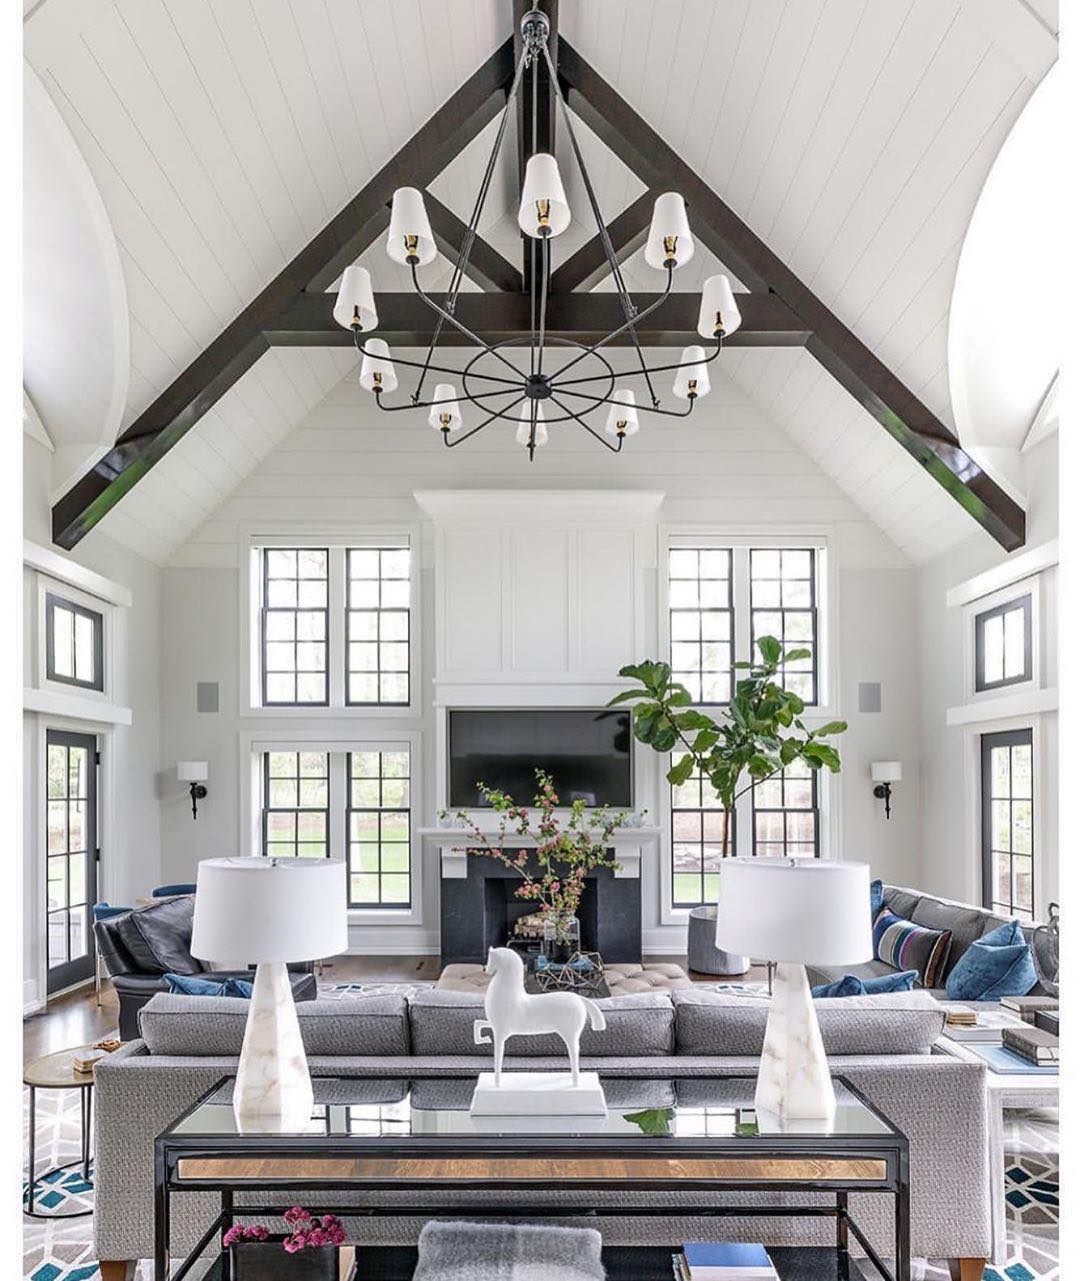 White contemporary living room with high ceilings. Photo by Instagram user @interiordesignbycasswicks